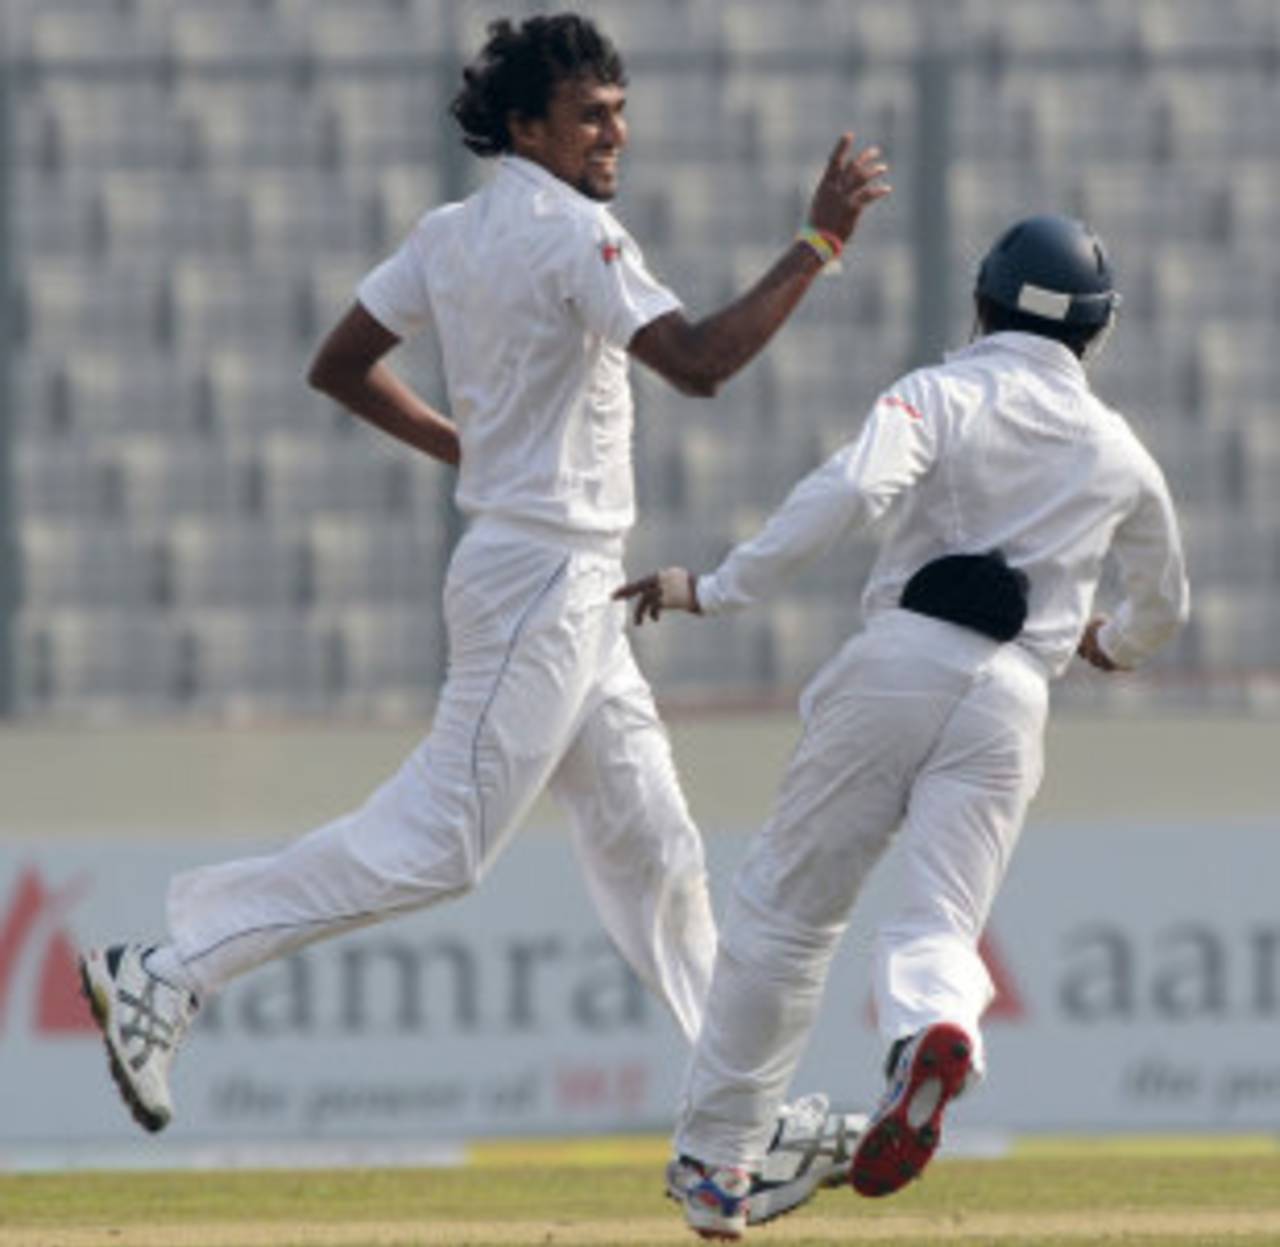 Suranga Lakmal is all smiles after picking up a wicket, Bangladesh v Sri Lanka, 1st Test, Mirpur, 4th day, January 30, 2014